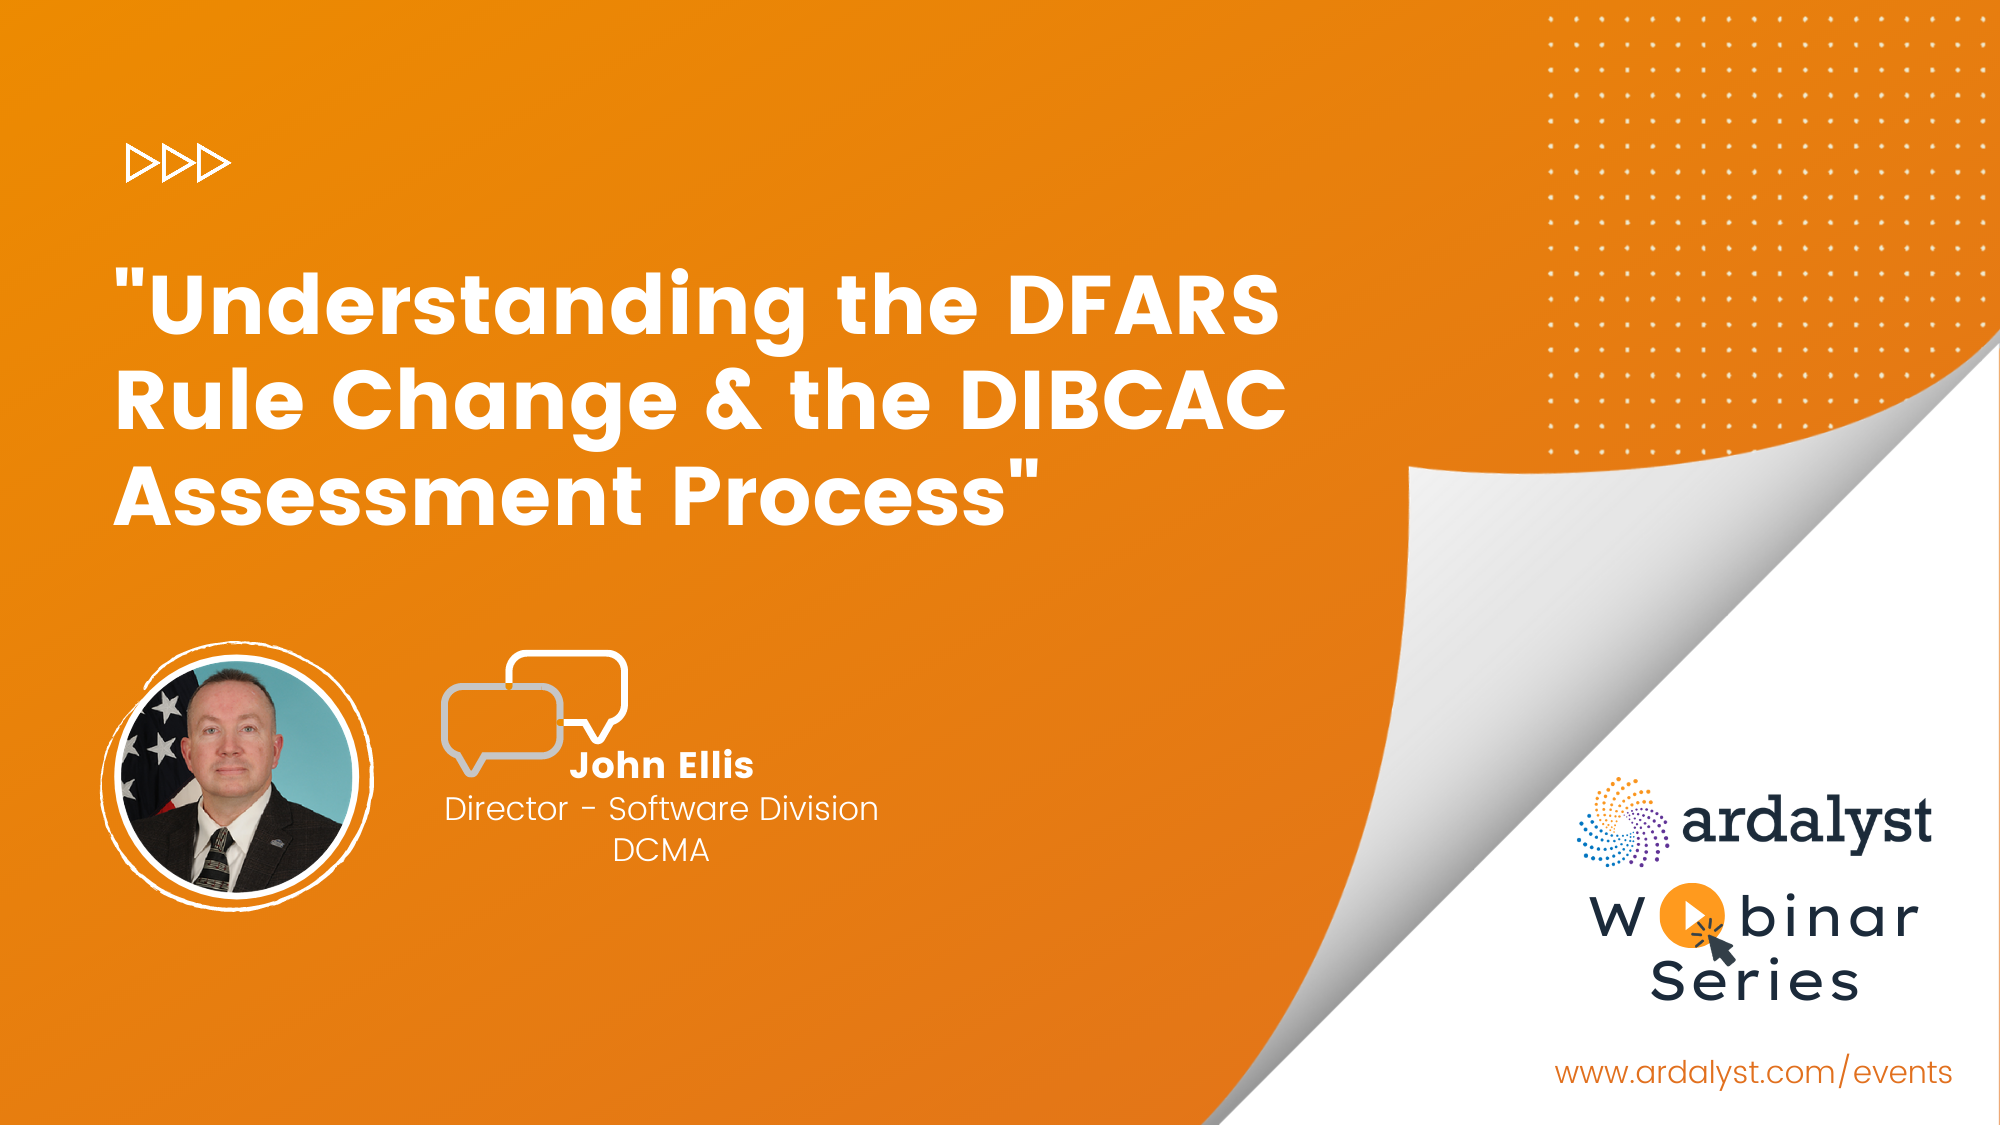 Understanding the DFARS Rule Change & the DIBCAC Assessment Process